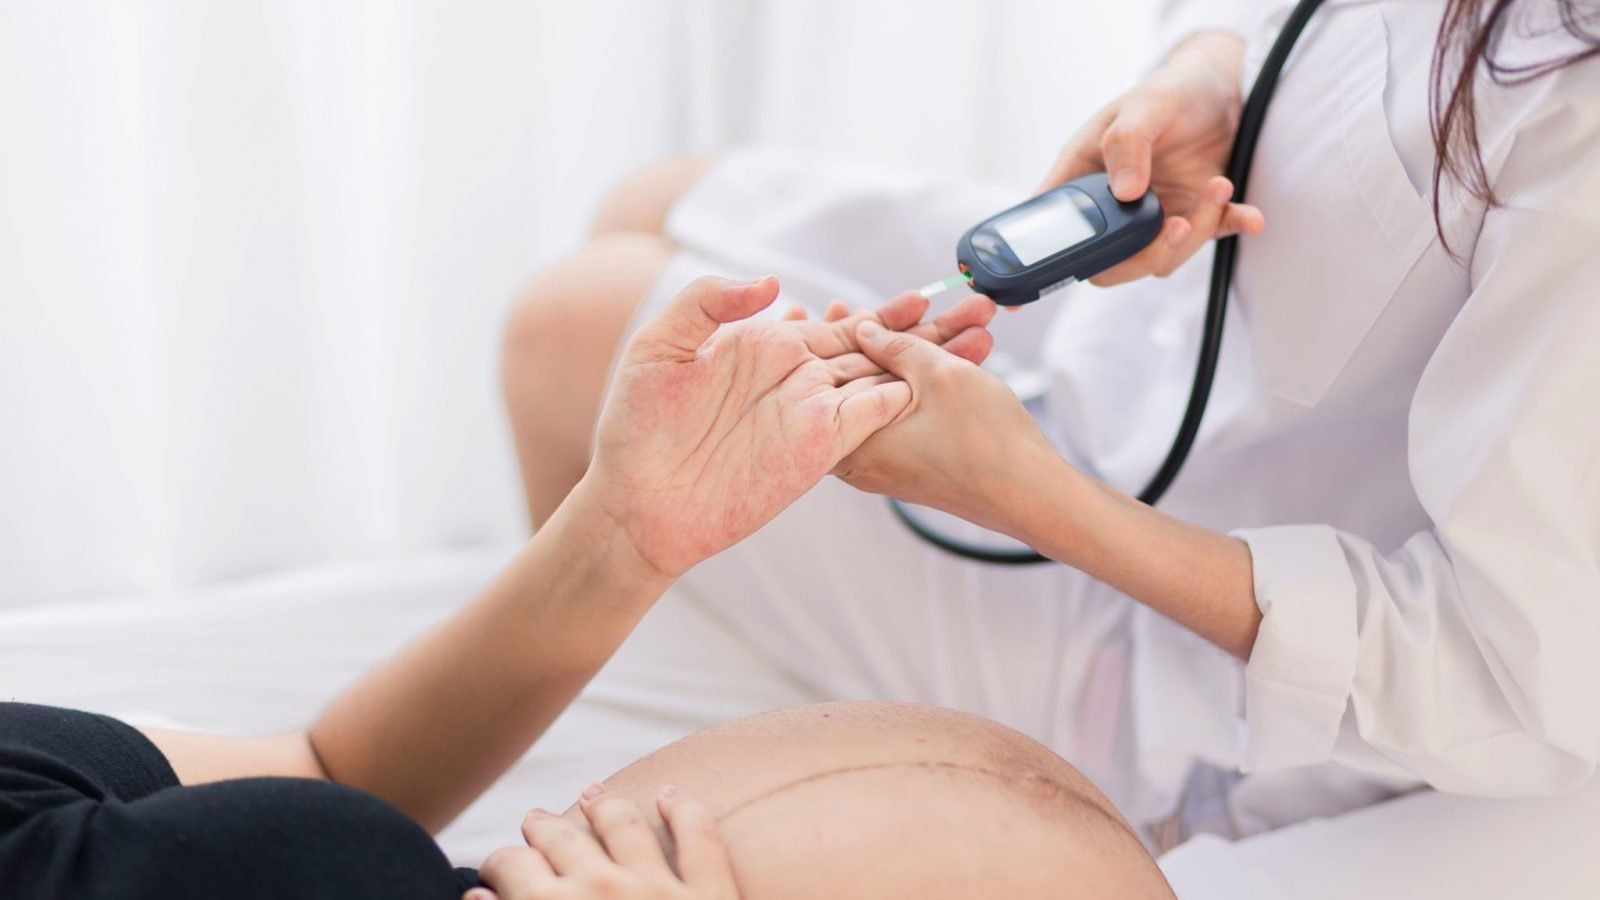 Female Obstetrician doctor checking for Gestational diabetes during pregnancy